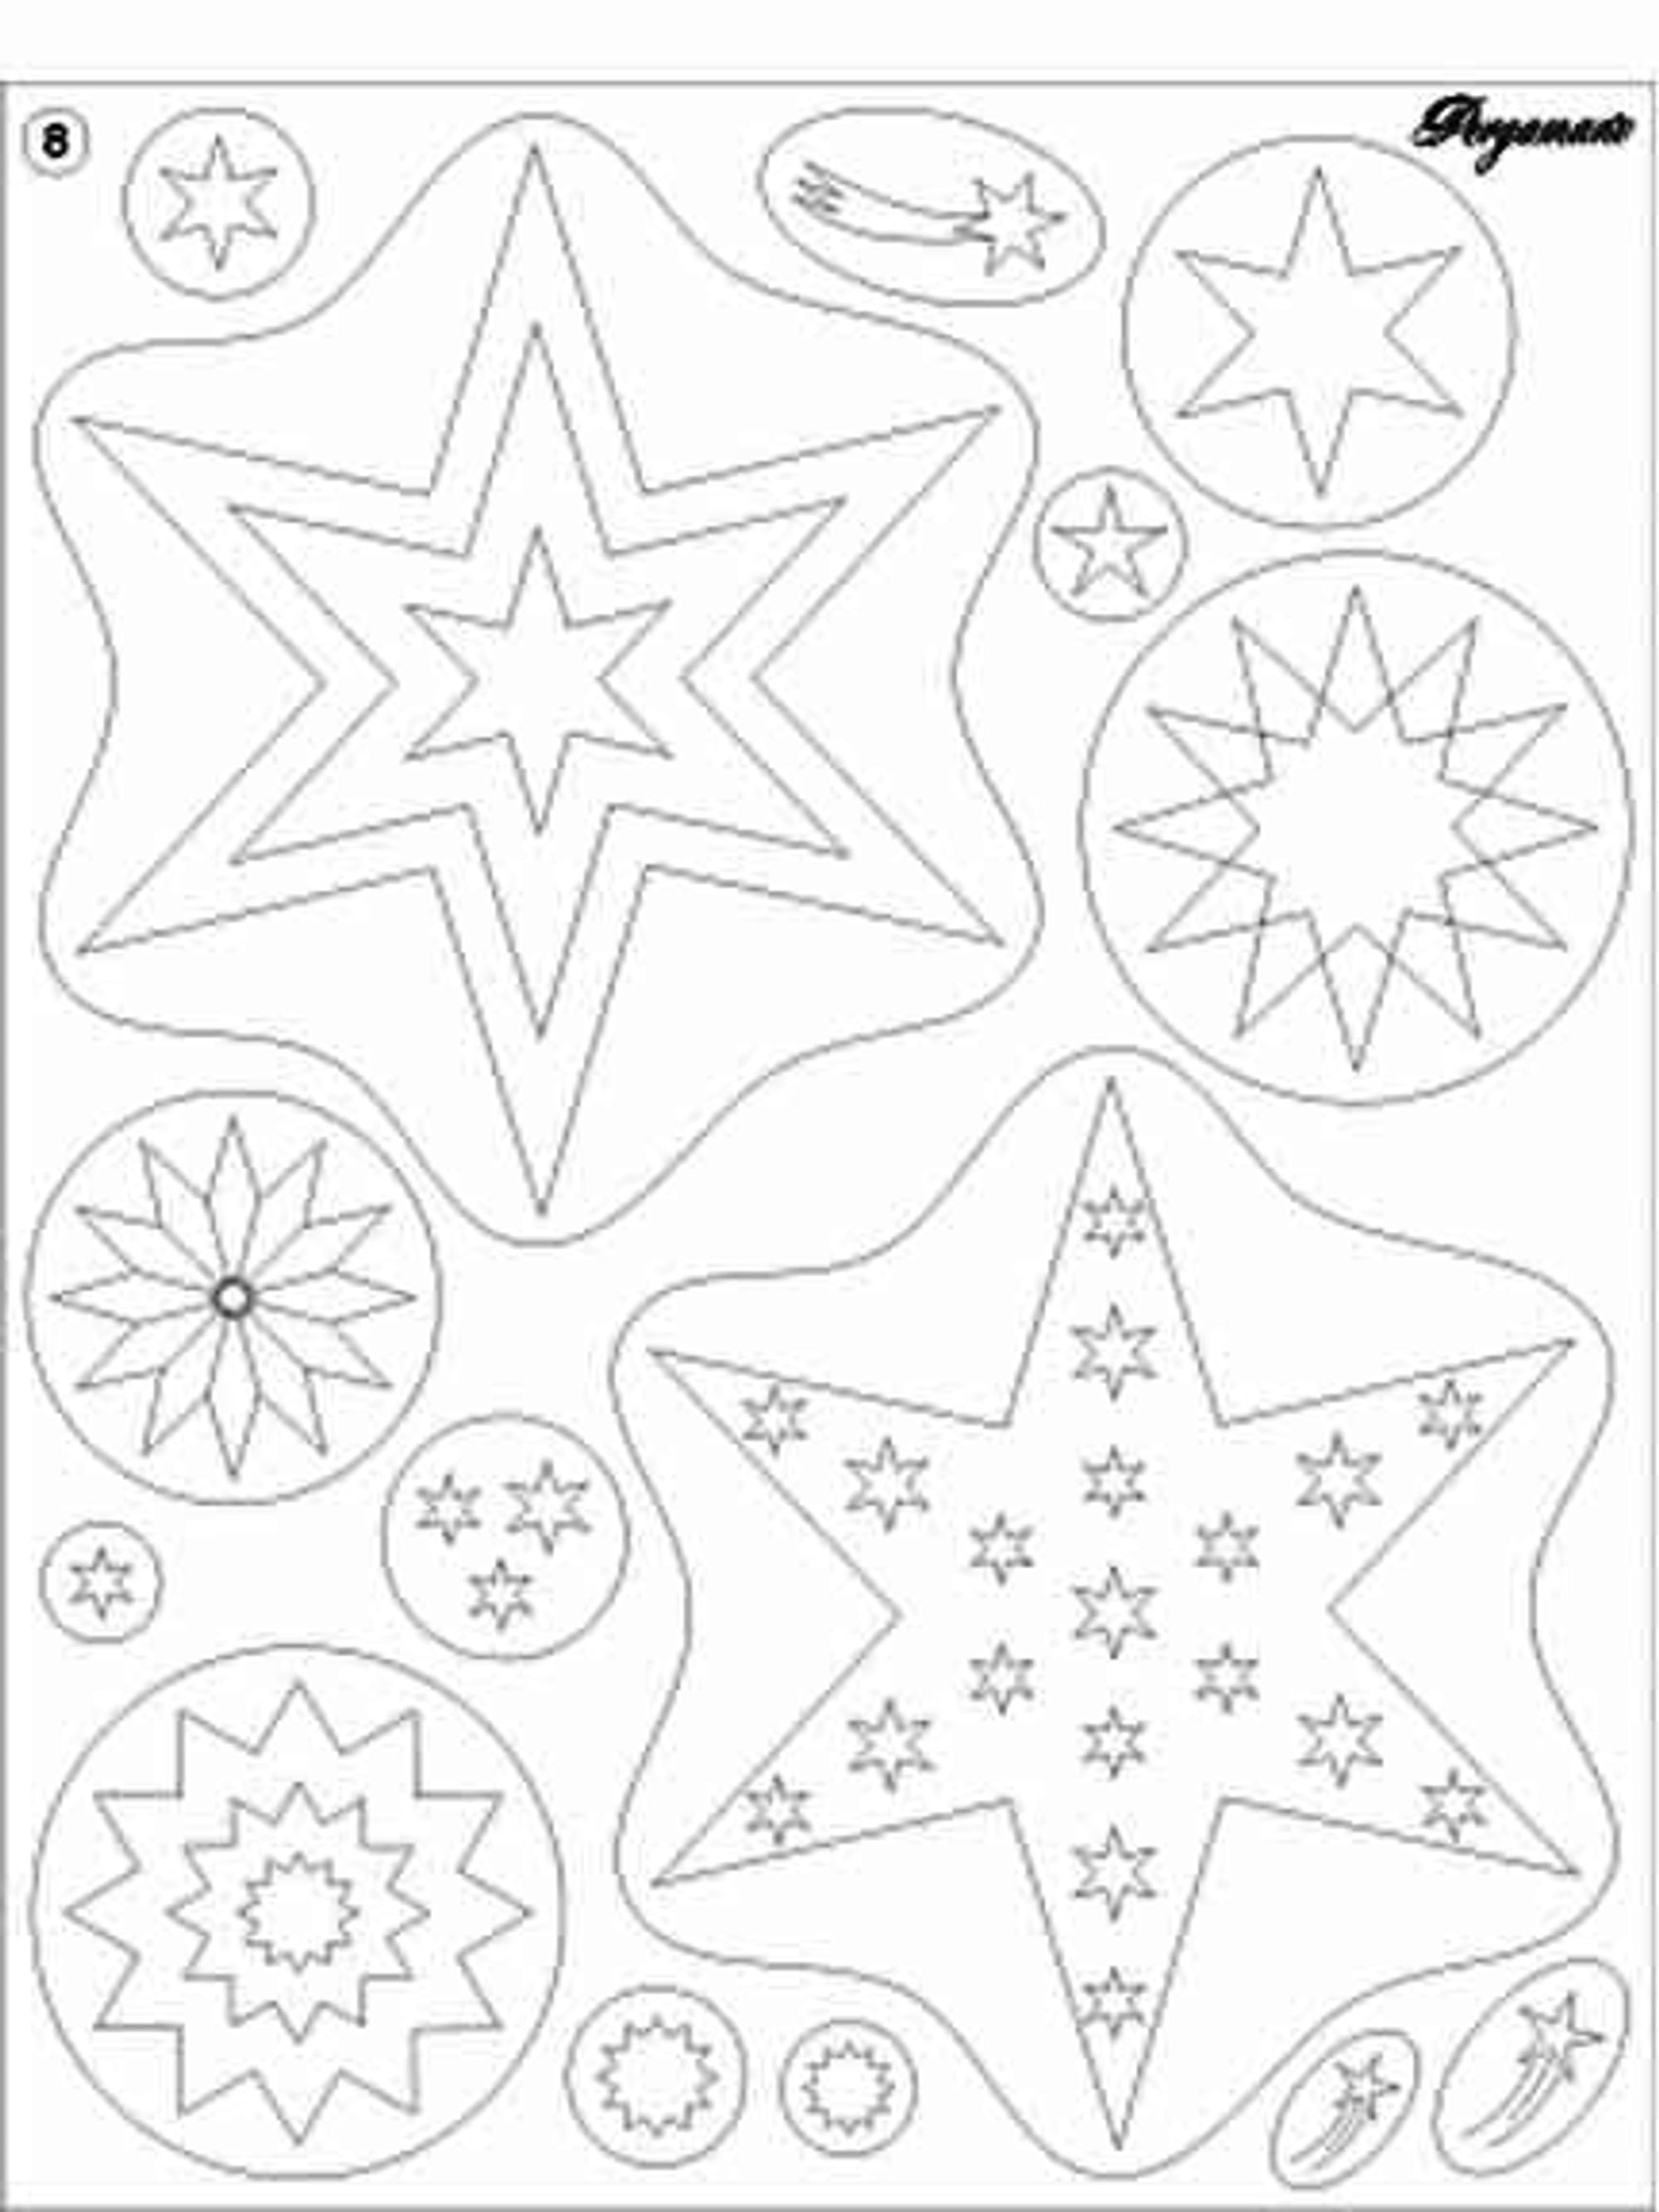 Clear Stamps - Stars